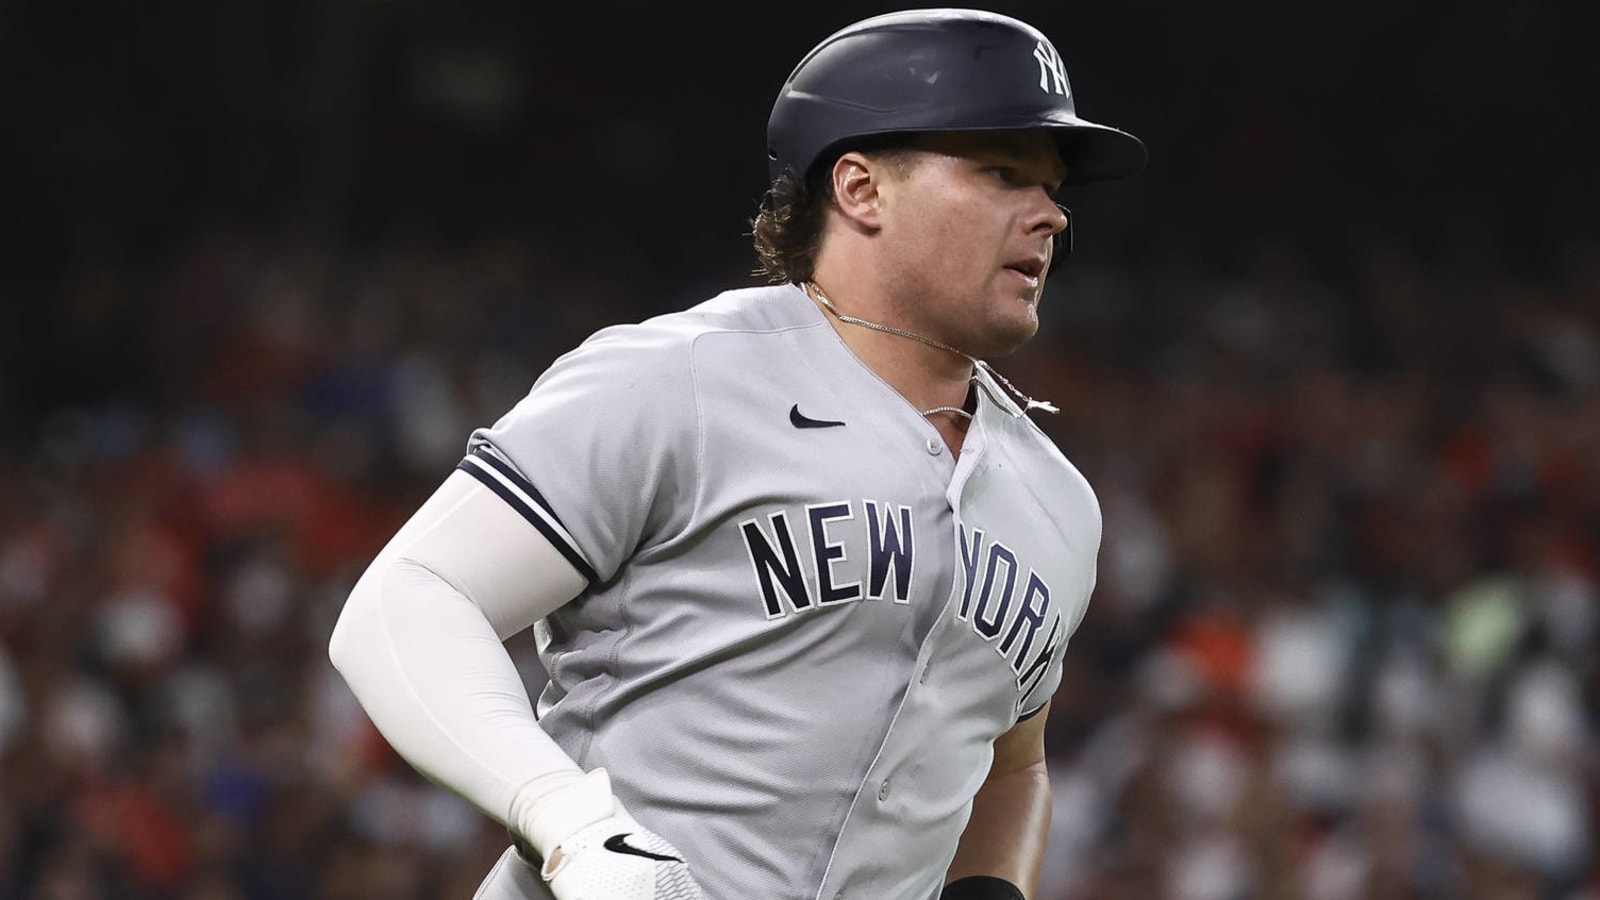 Yankees activate Luke Voit, place Anthony Rizzo on COVID-IL